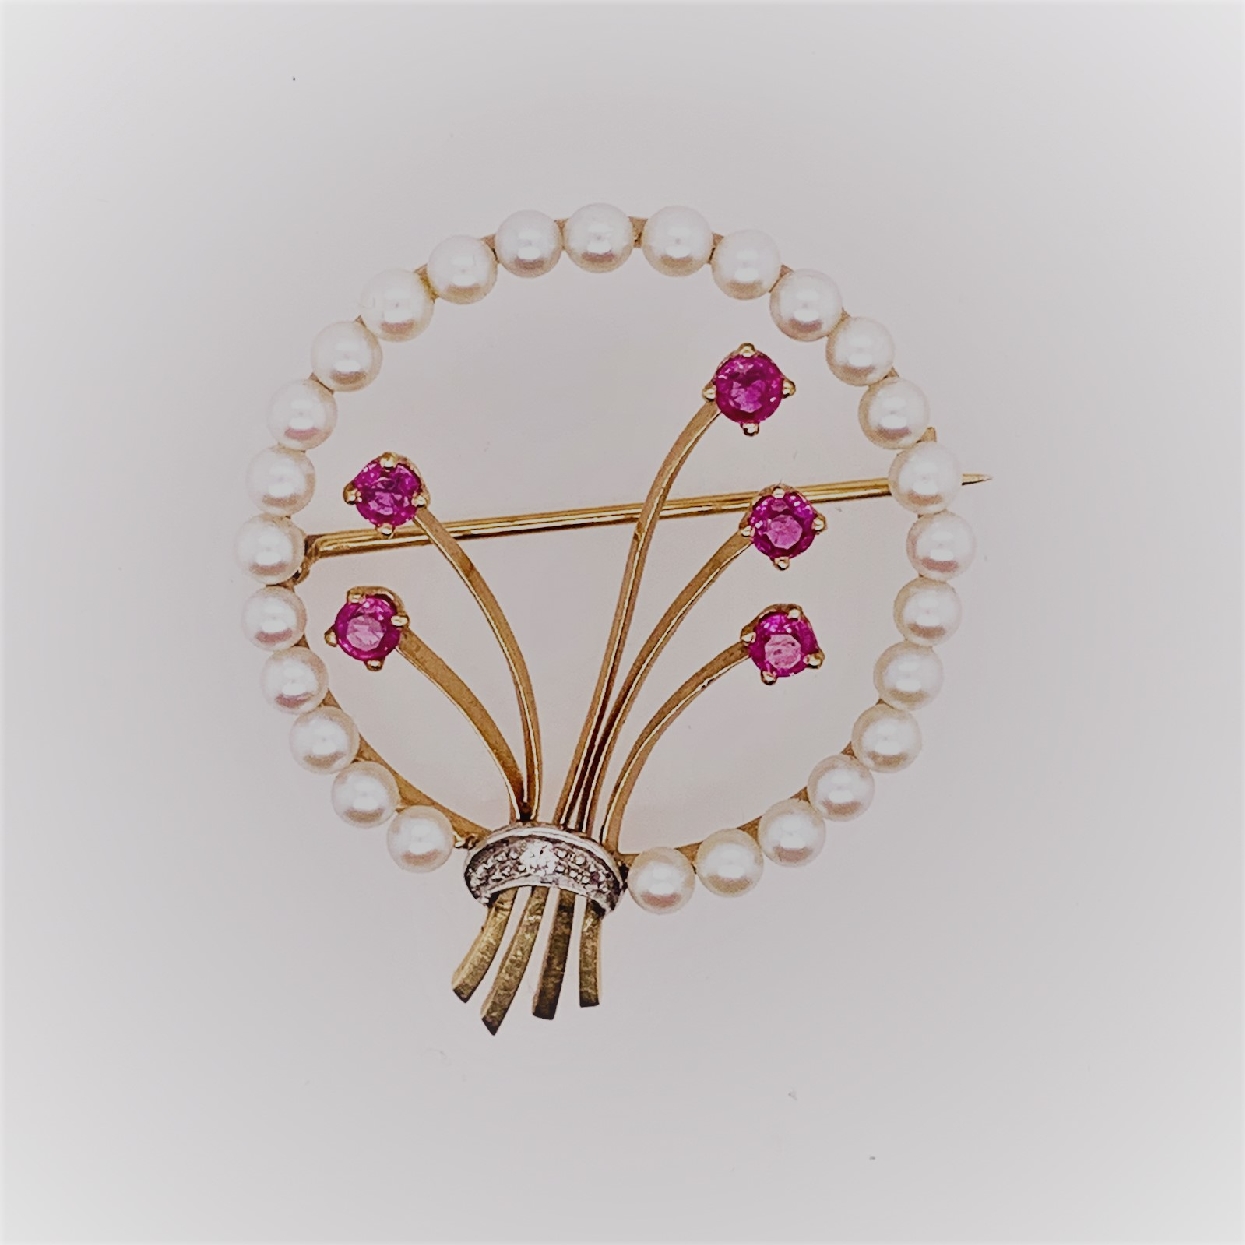 14K Yellow Gold and Platinum Floral Pin with Pearls; Rubies; and Diamond Accent